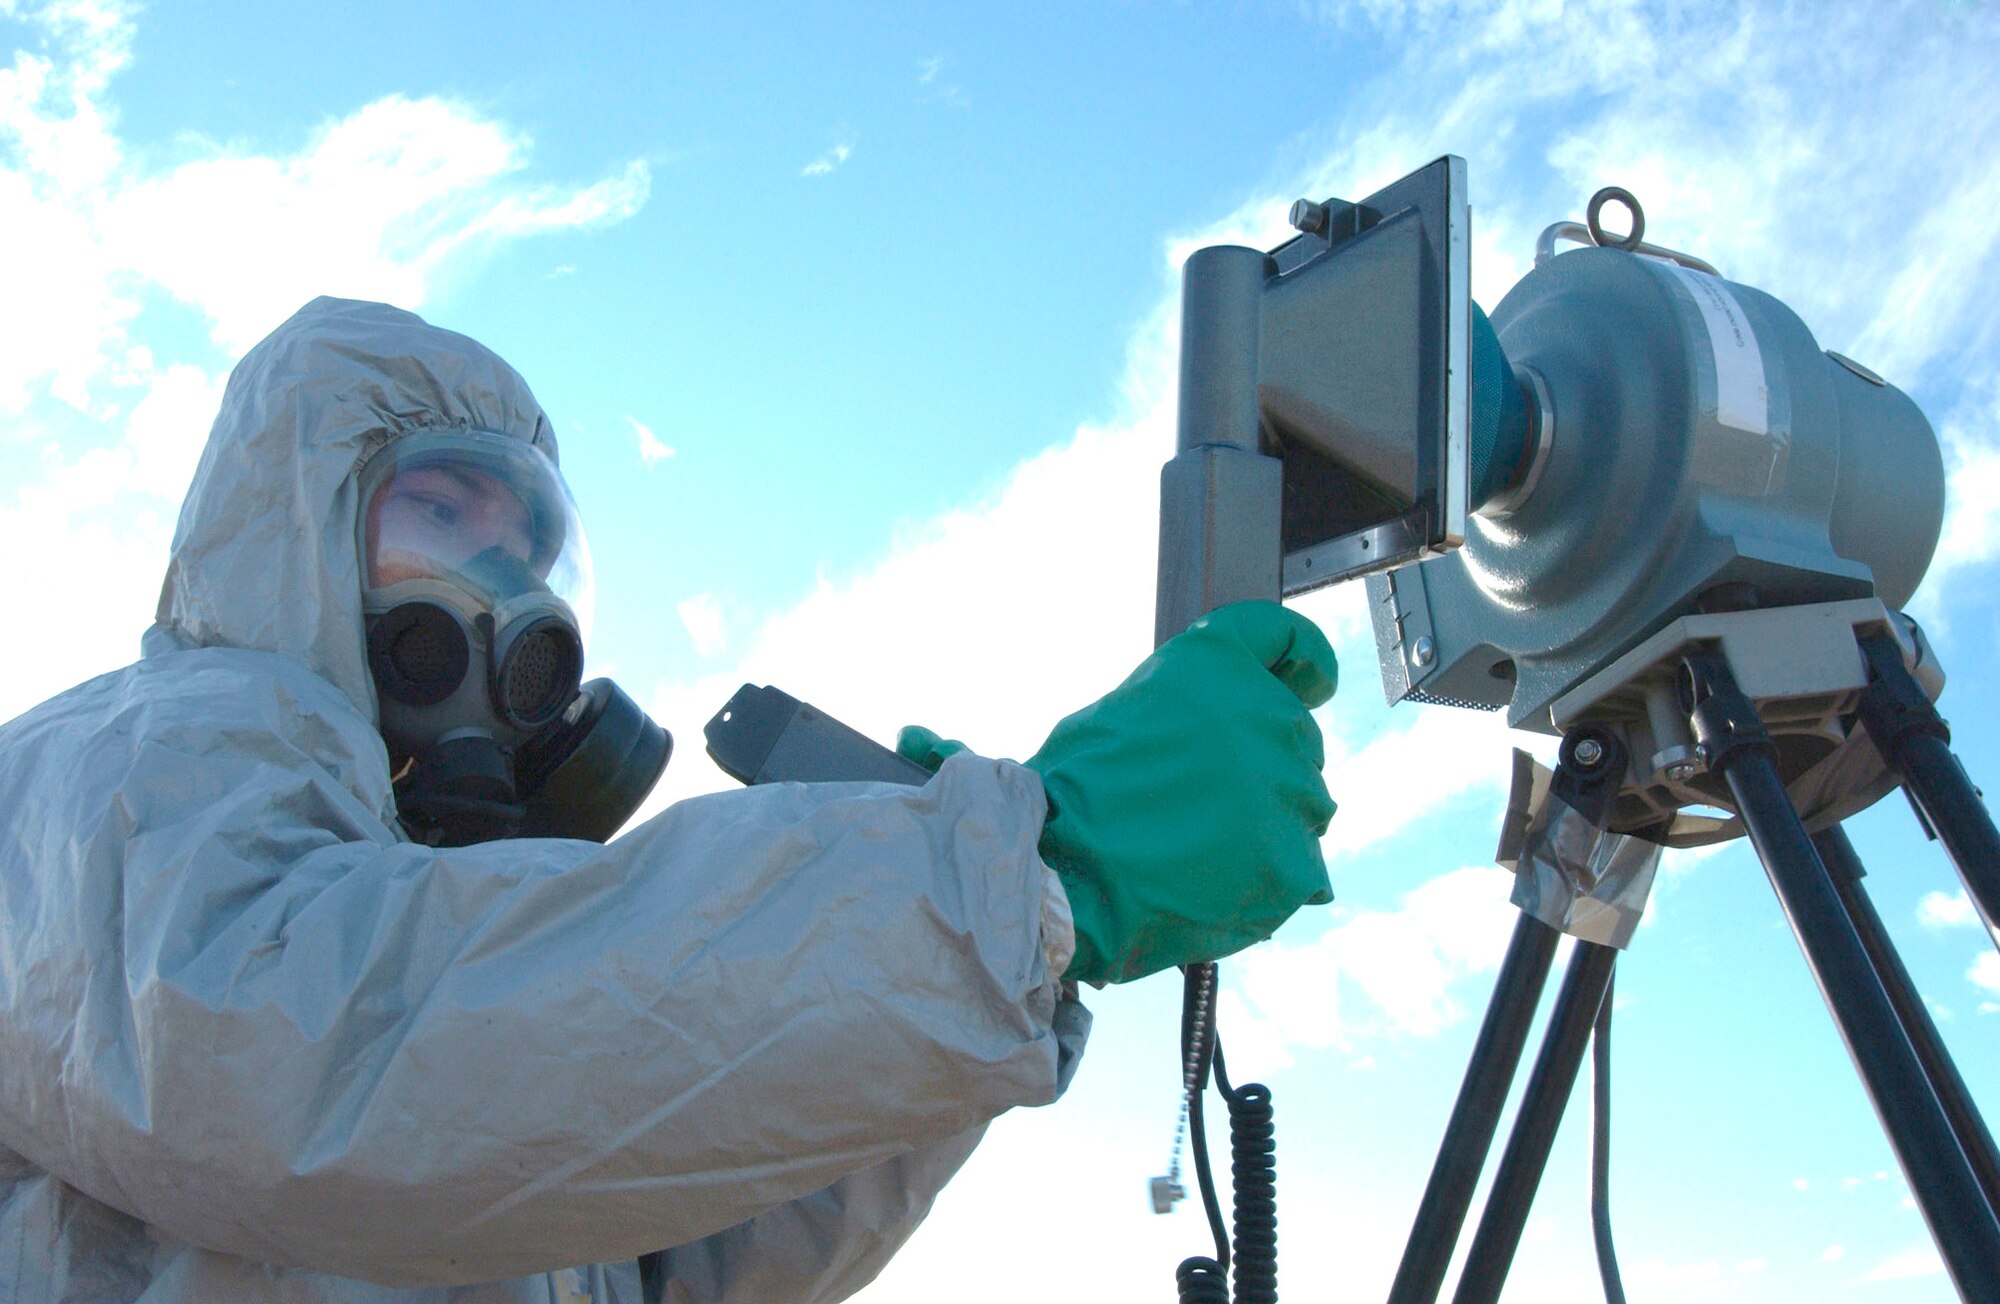 Staff Sgt. Xavier Goco monitors radiation levels and tests for potential contamination using a high volume air sampling monitor and an ADM-300 at a simulated aircraft crash site on Davis-Monthan Air Force Base, Ariz., Dec. 4 during Vigilant Shield 07. Vigilant Shield 07 is a joint nuclear weapon accident exercise designed to train Department of Defense and federal agencies on response efforts as a cohesive team. The exercise involved a variety of agencies representing the county, state and federal governments. Sergeant Goco is assigned to the 355th Aerospace Medicine Squadron. (U.S. Air Force photo/Airman 1st Class Alesia Goosic)